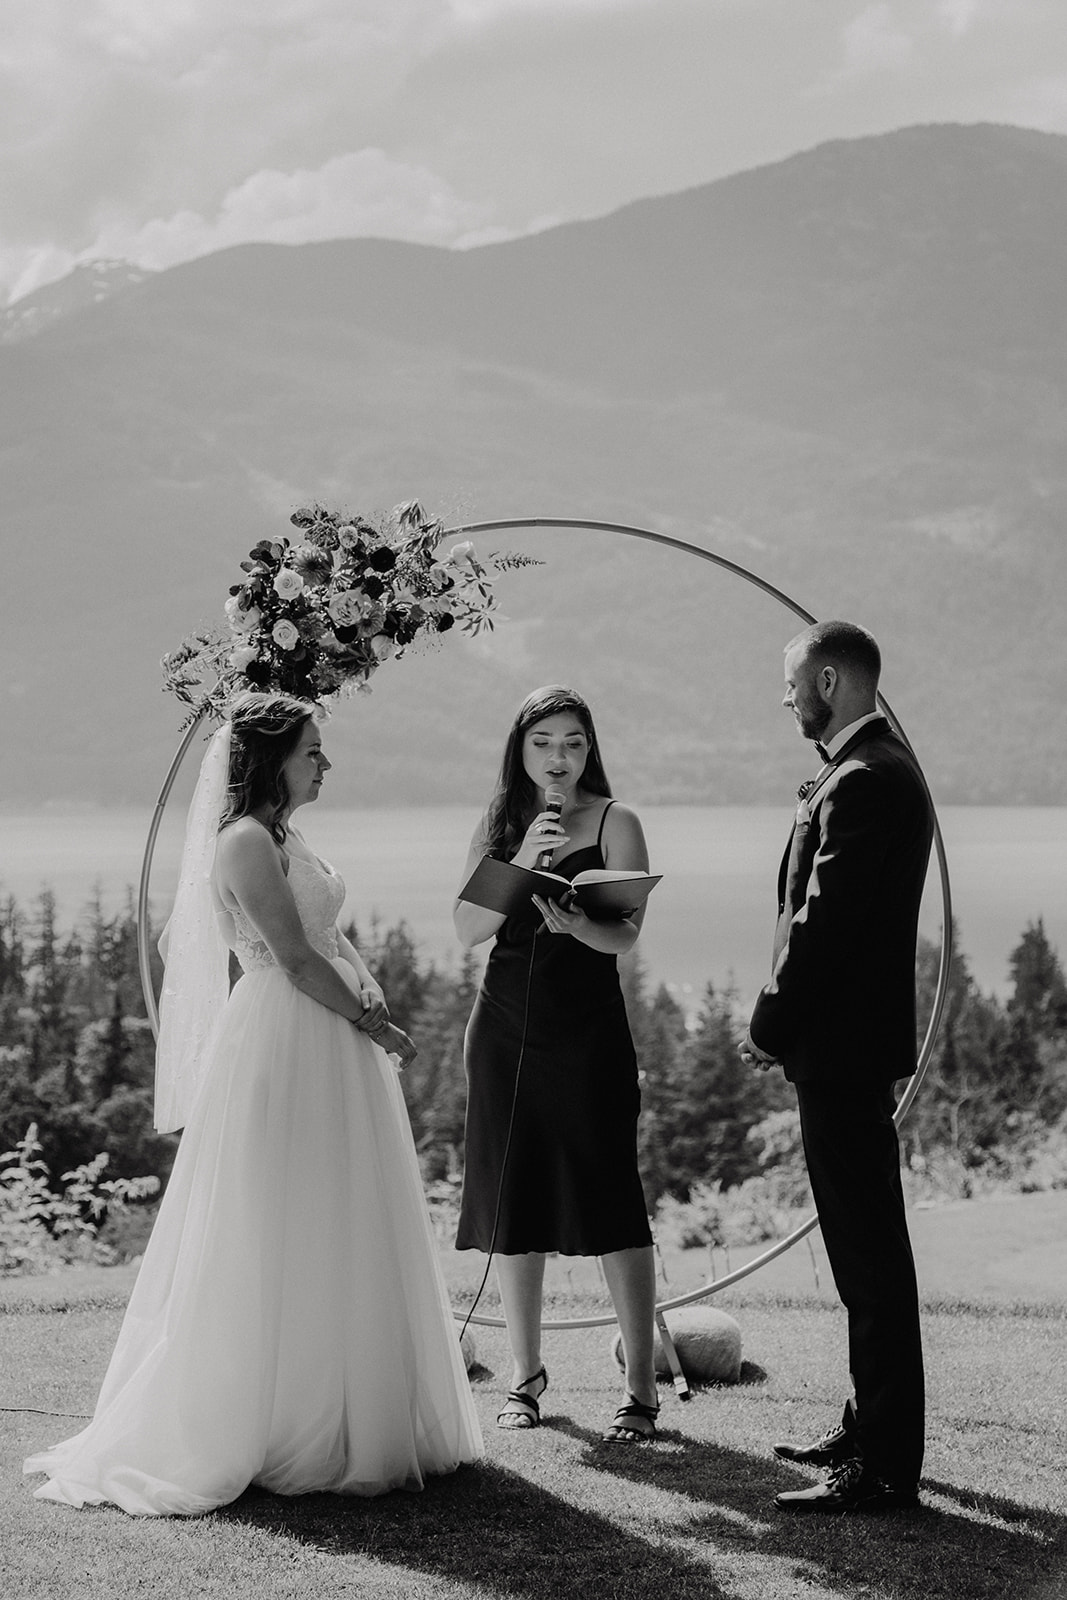 Sunny Vancouver wedding ceremony in front of mountain views